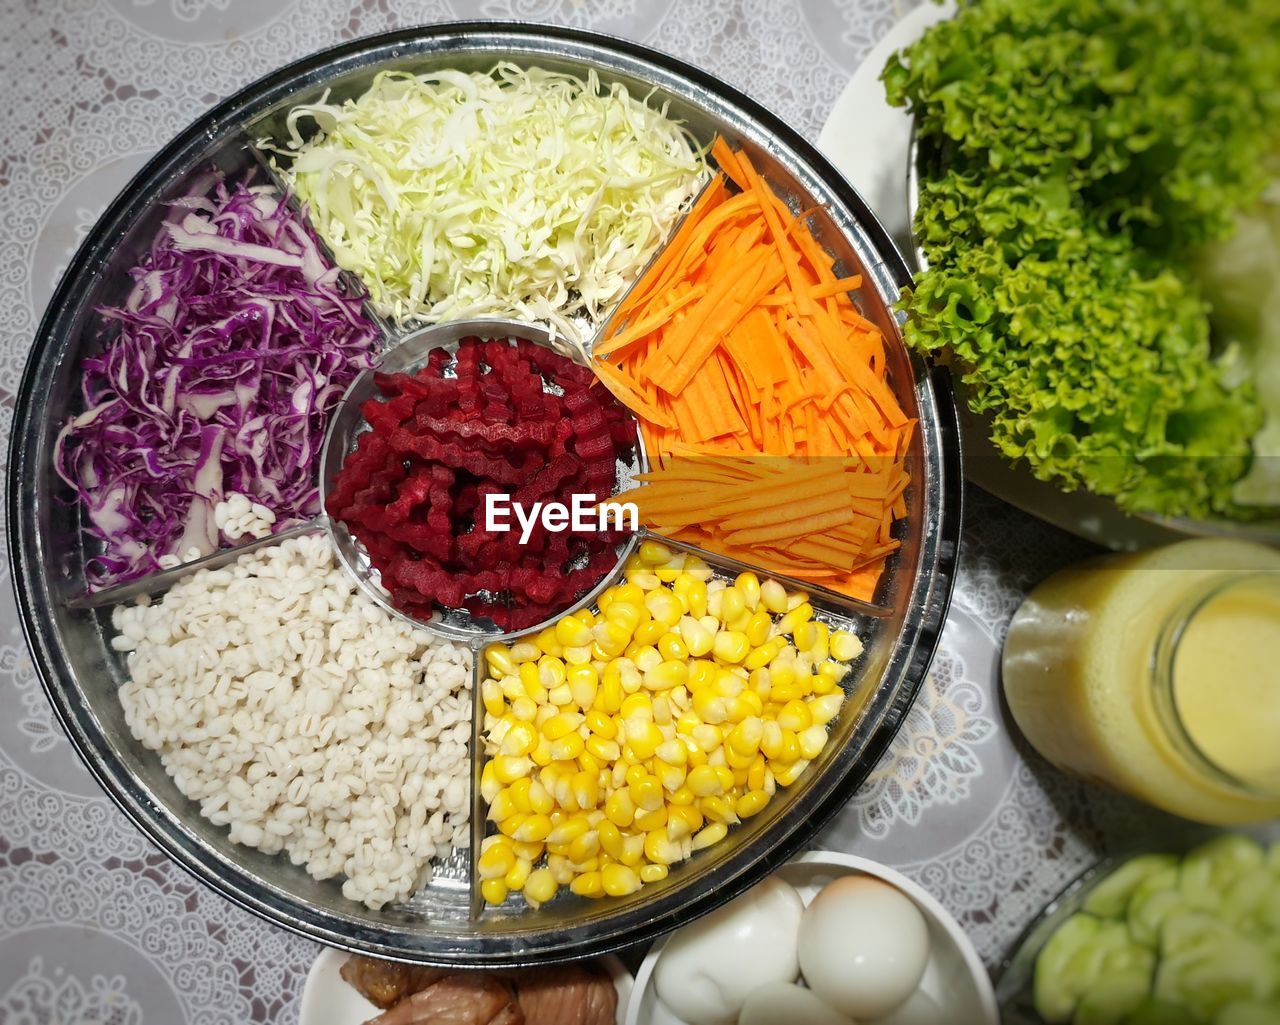 HIGH ANGLE VIEW OF CHOPPED FOOD IN BOWL